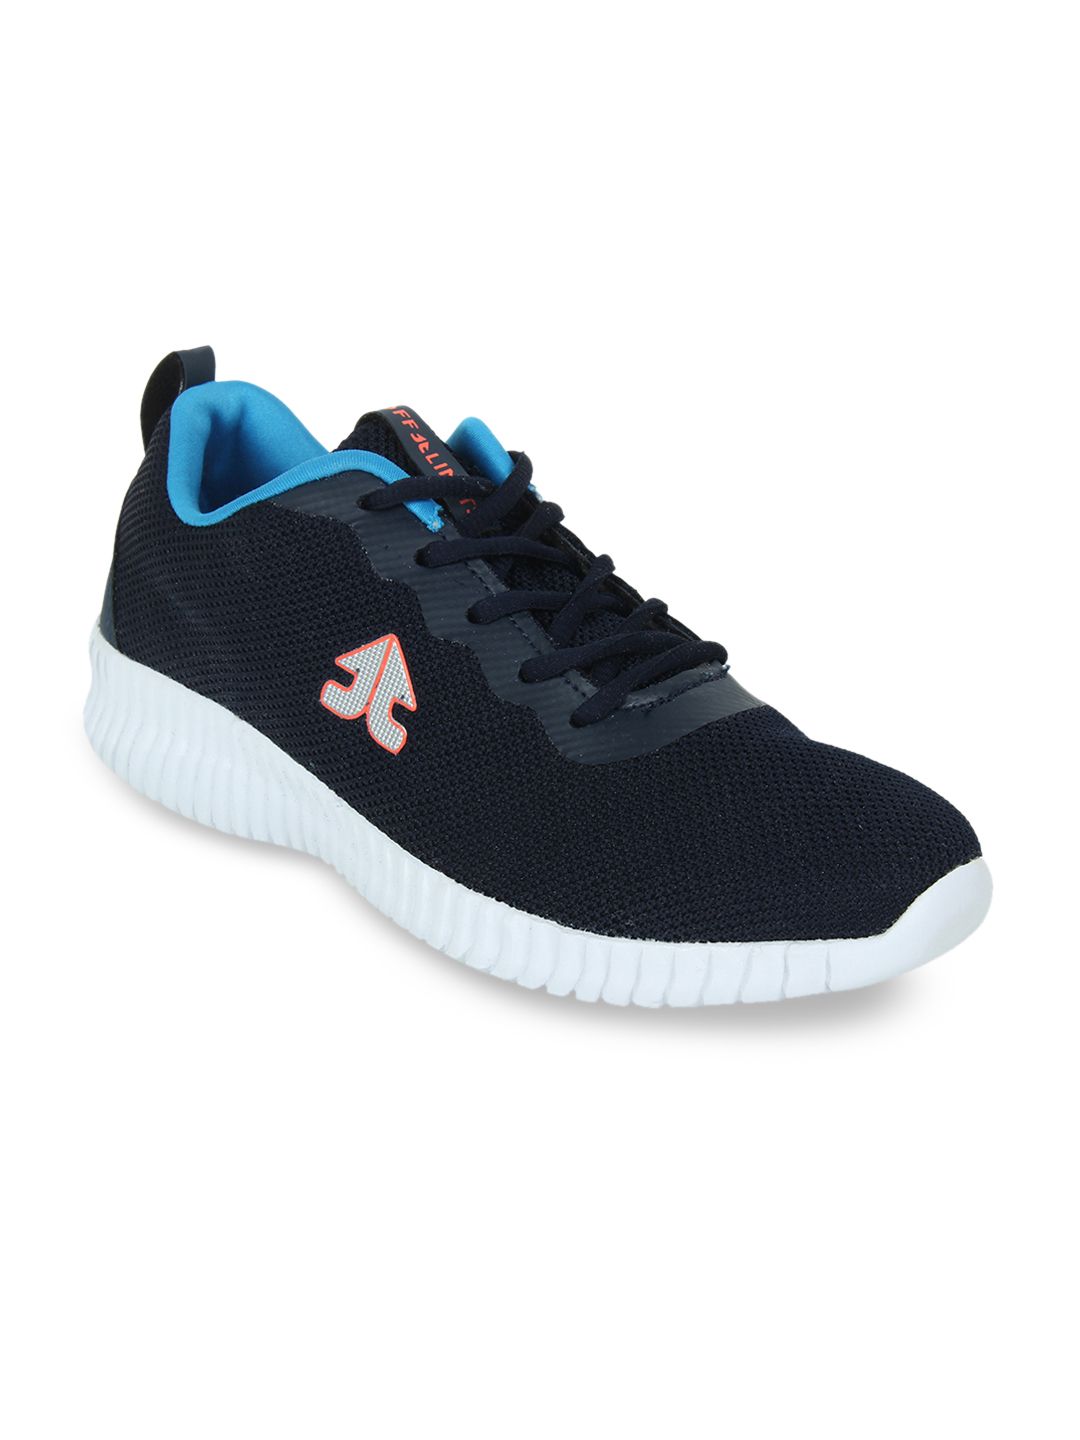 OFF LIMITS Women Navy Blue Mesh Running Shoes Price in India